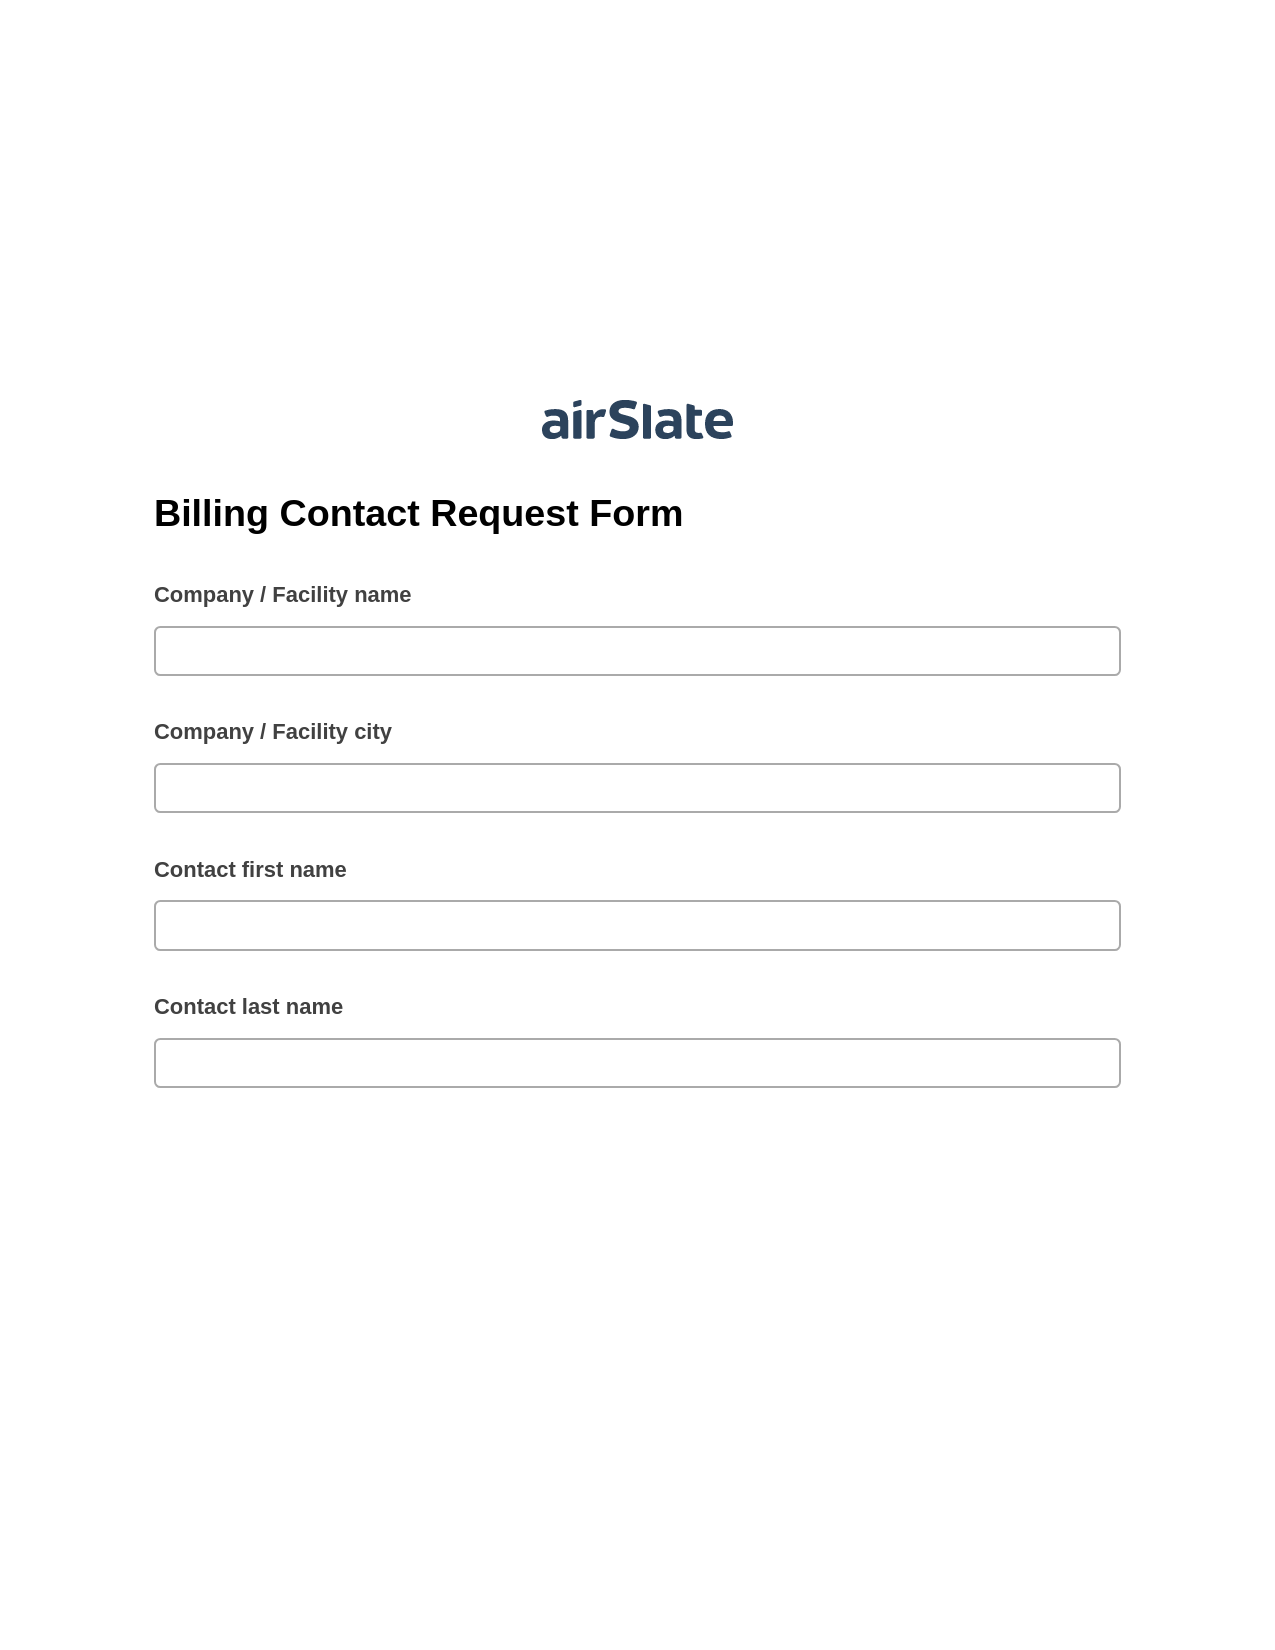 Multirole Billing Contact Request Form Pre-fill from Salesforce Records with SOQL Bot, Unassign Role Bot, Slack Two-Way Binding Bot